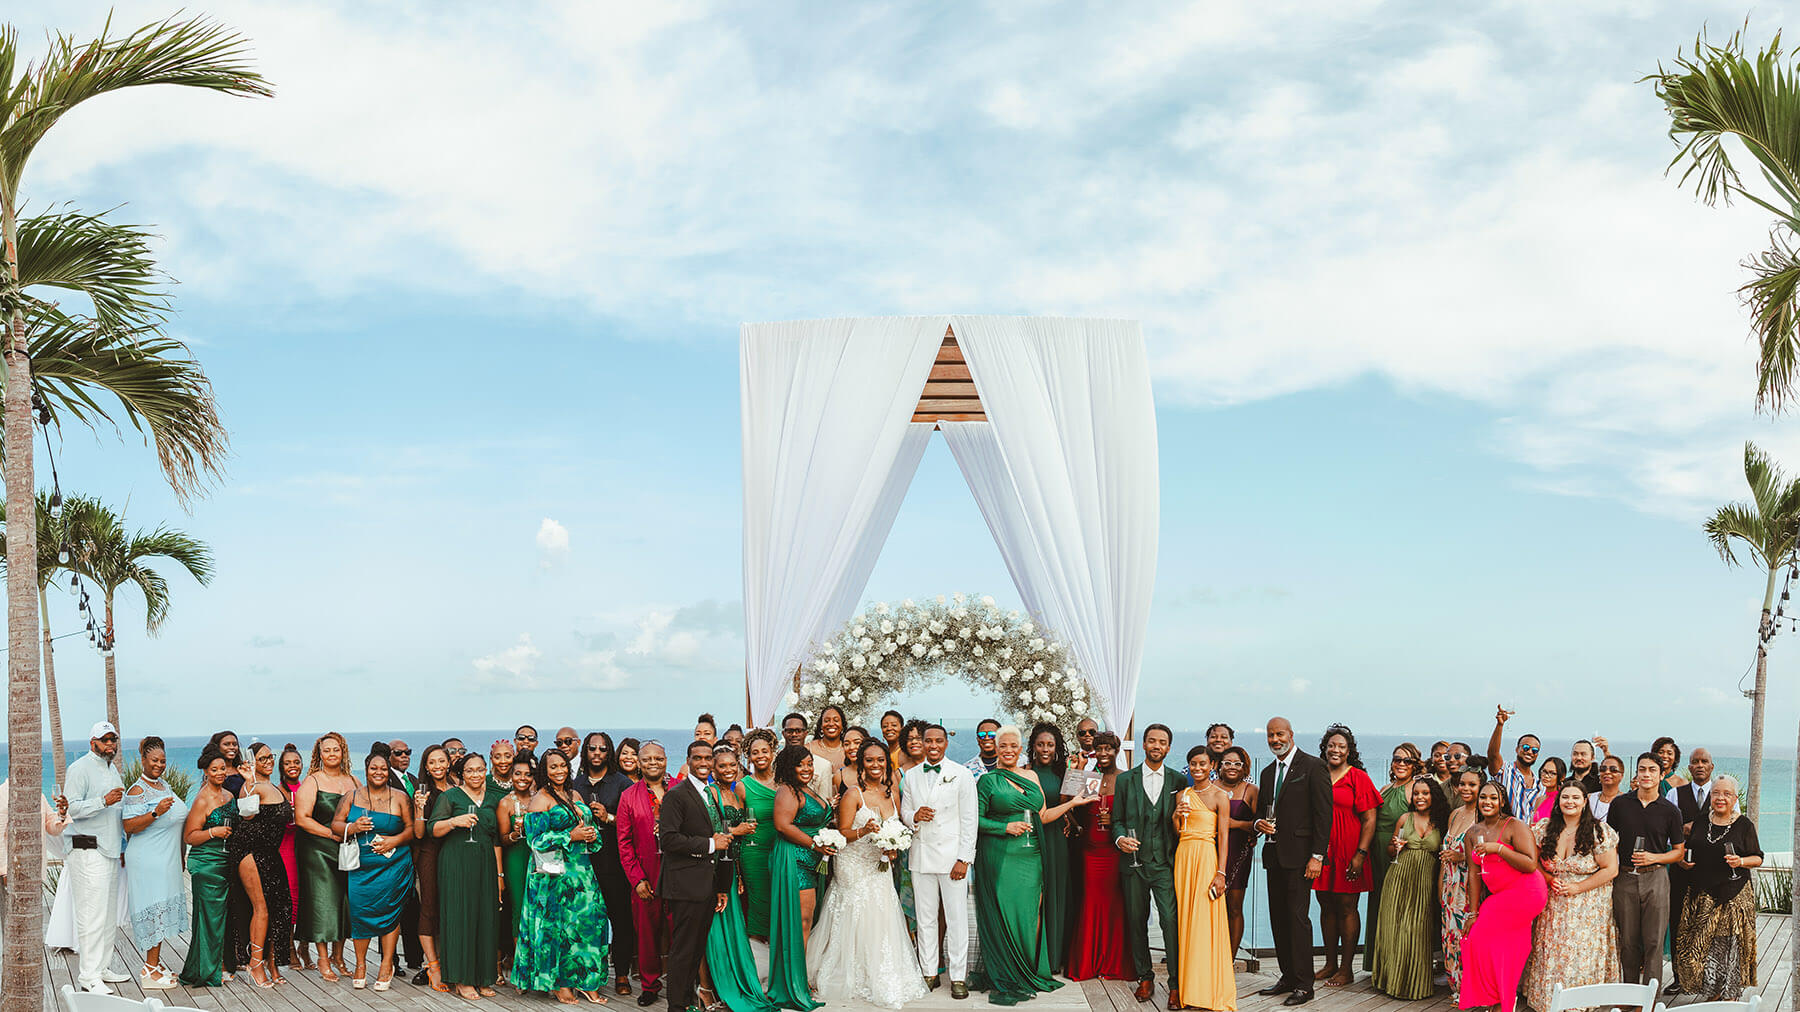 Wondering who to invite to your destination wedding? Family loves to celebrate a destination wedding in mexico, booked in a destination wedding room block!